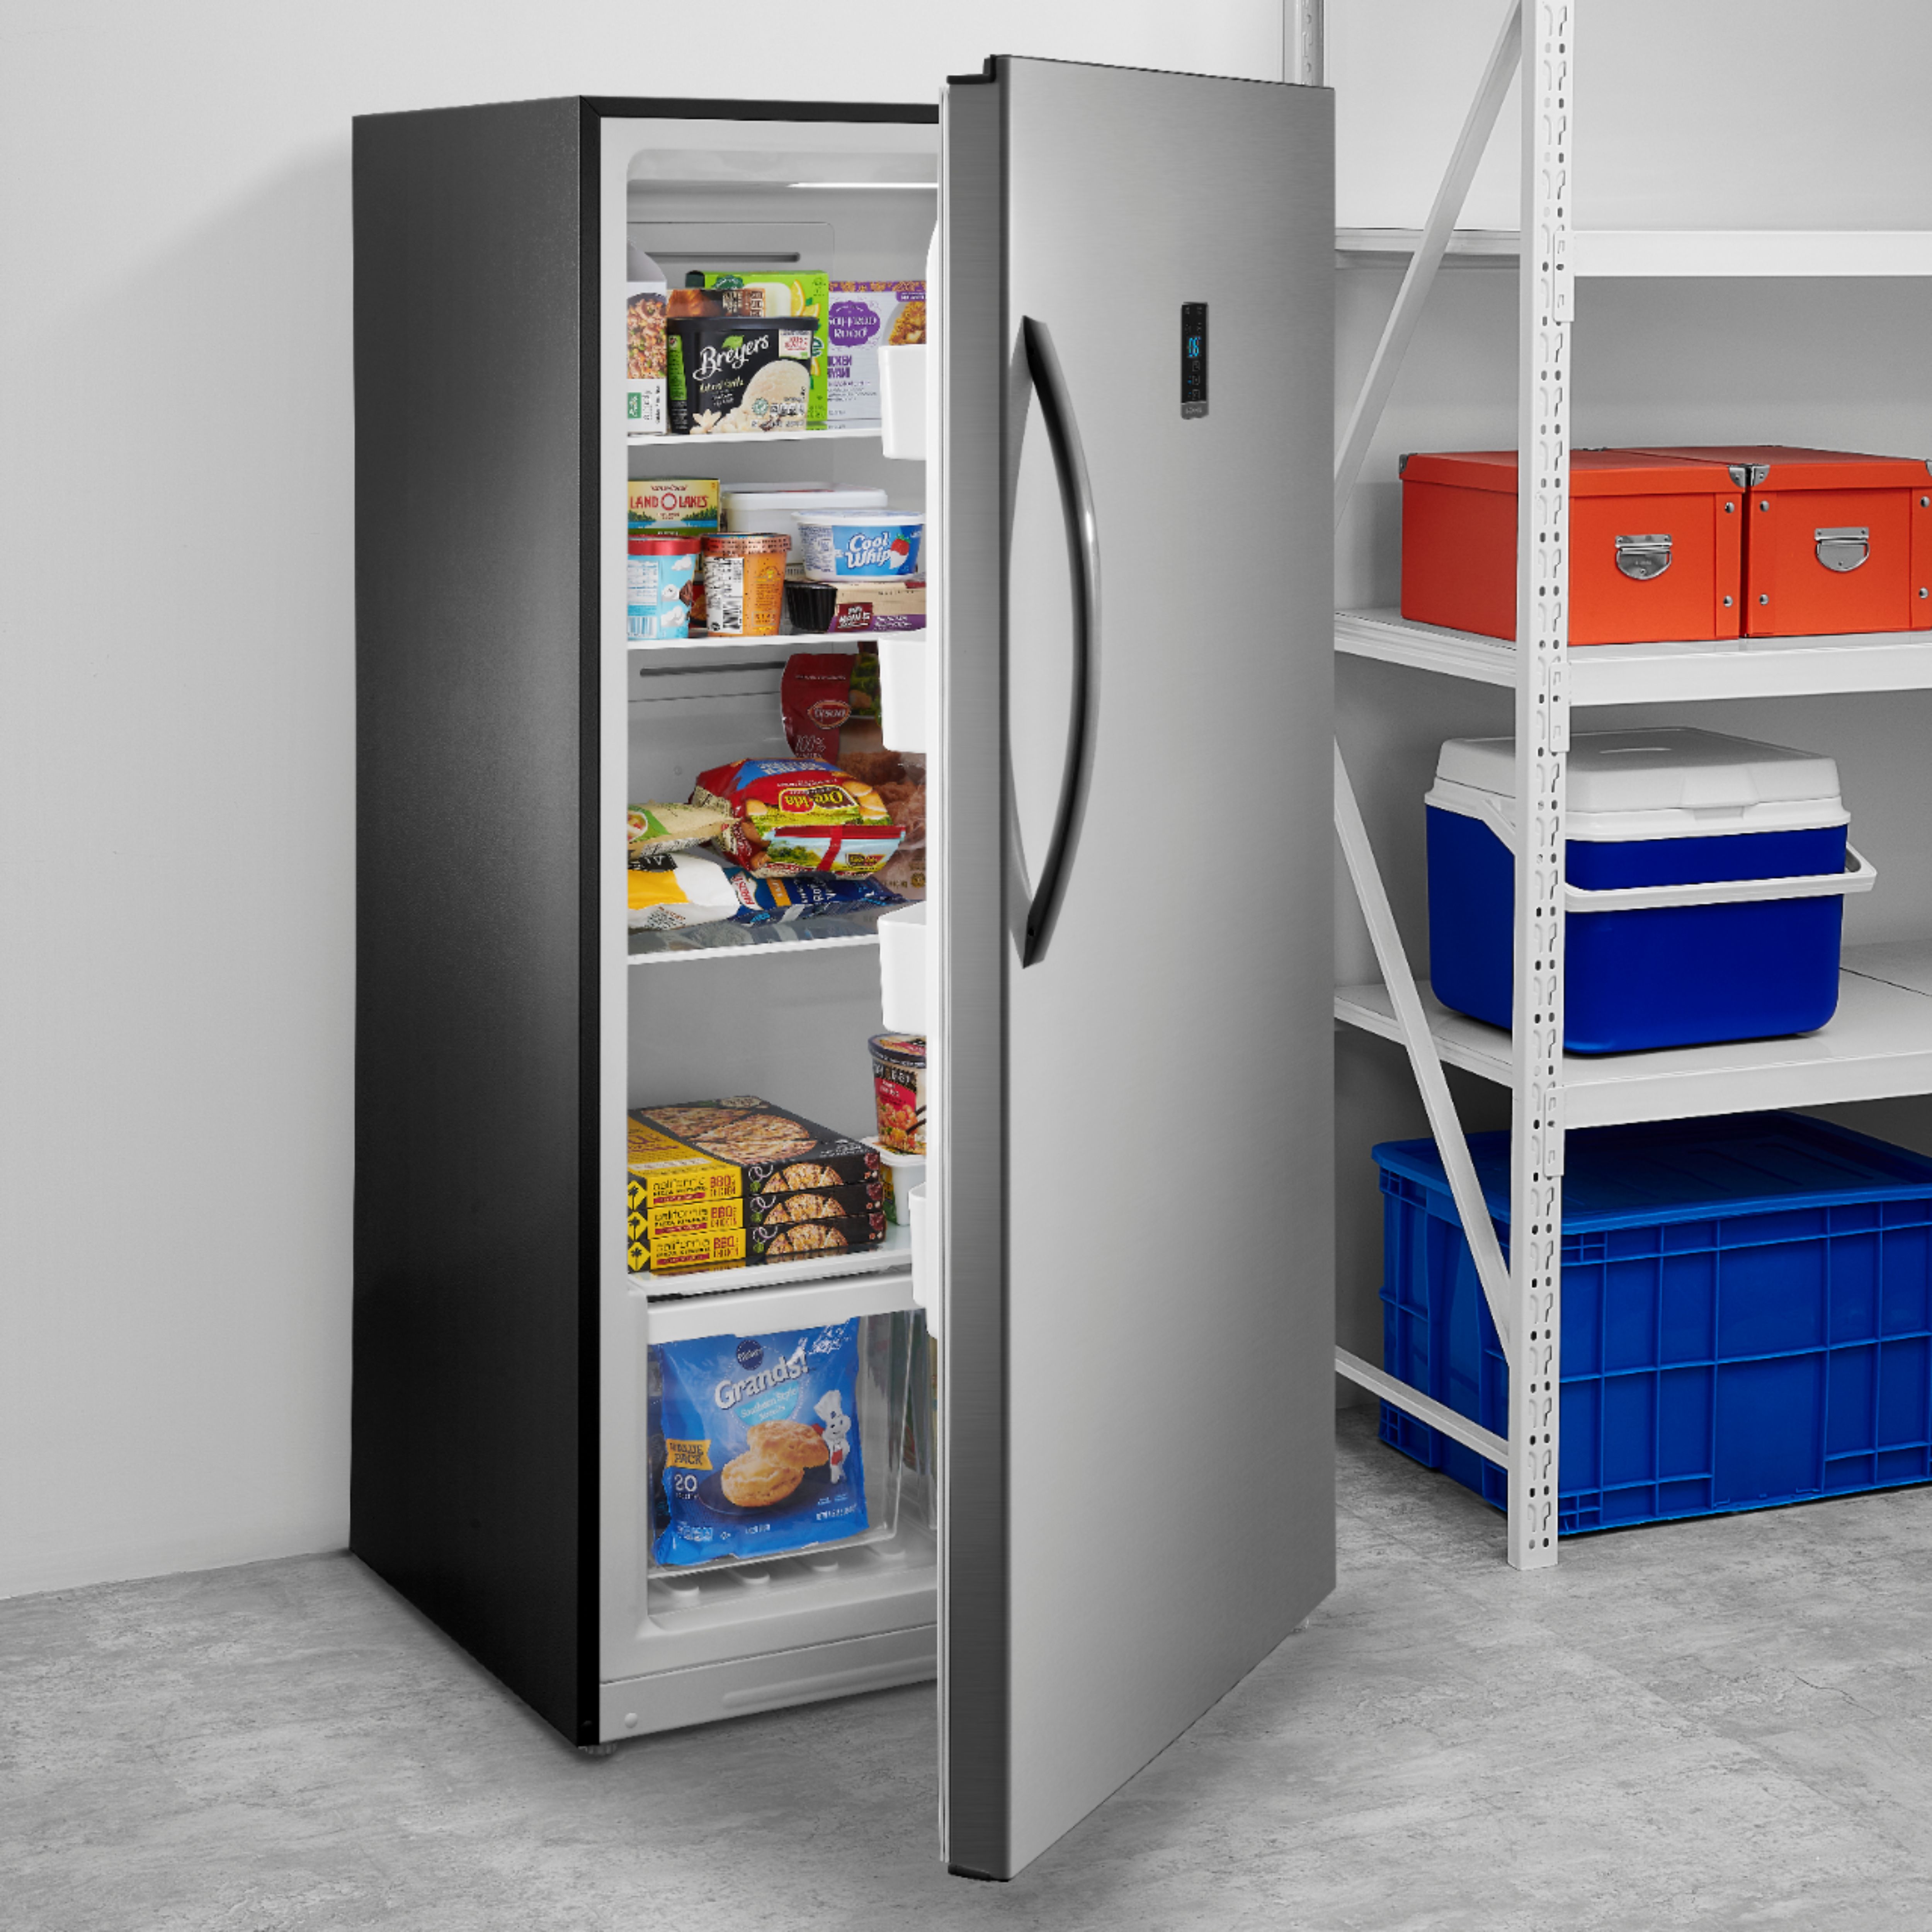 How To Control The Temperature In Your Insignia Freezer: A ...